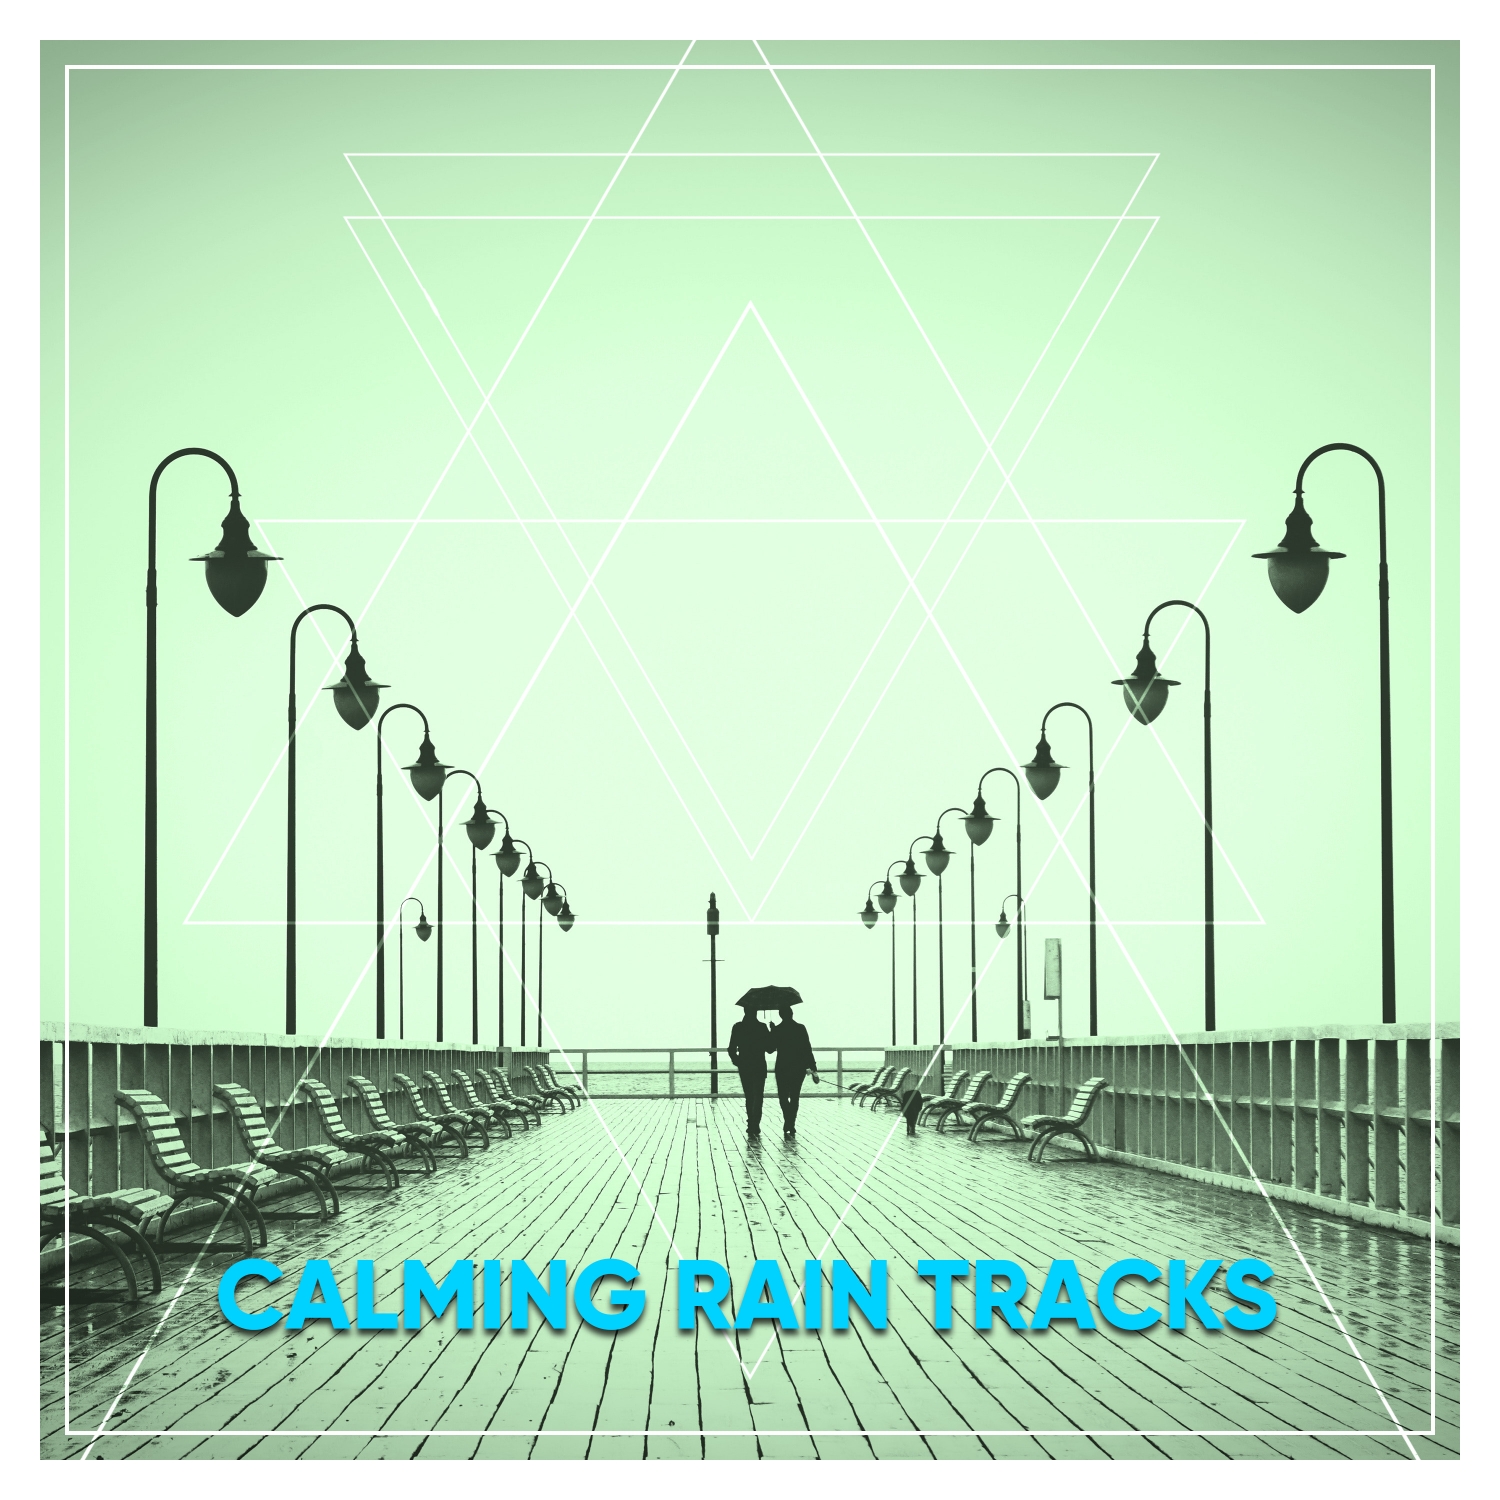 12 Calming Rain Tracks to Rest Your Mind